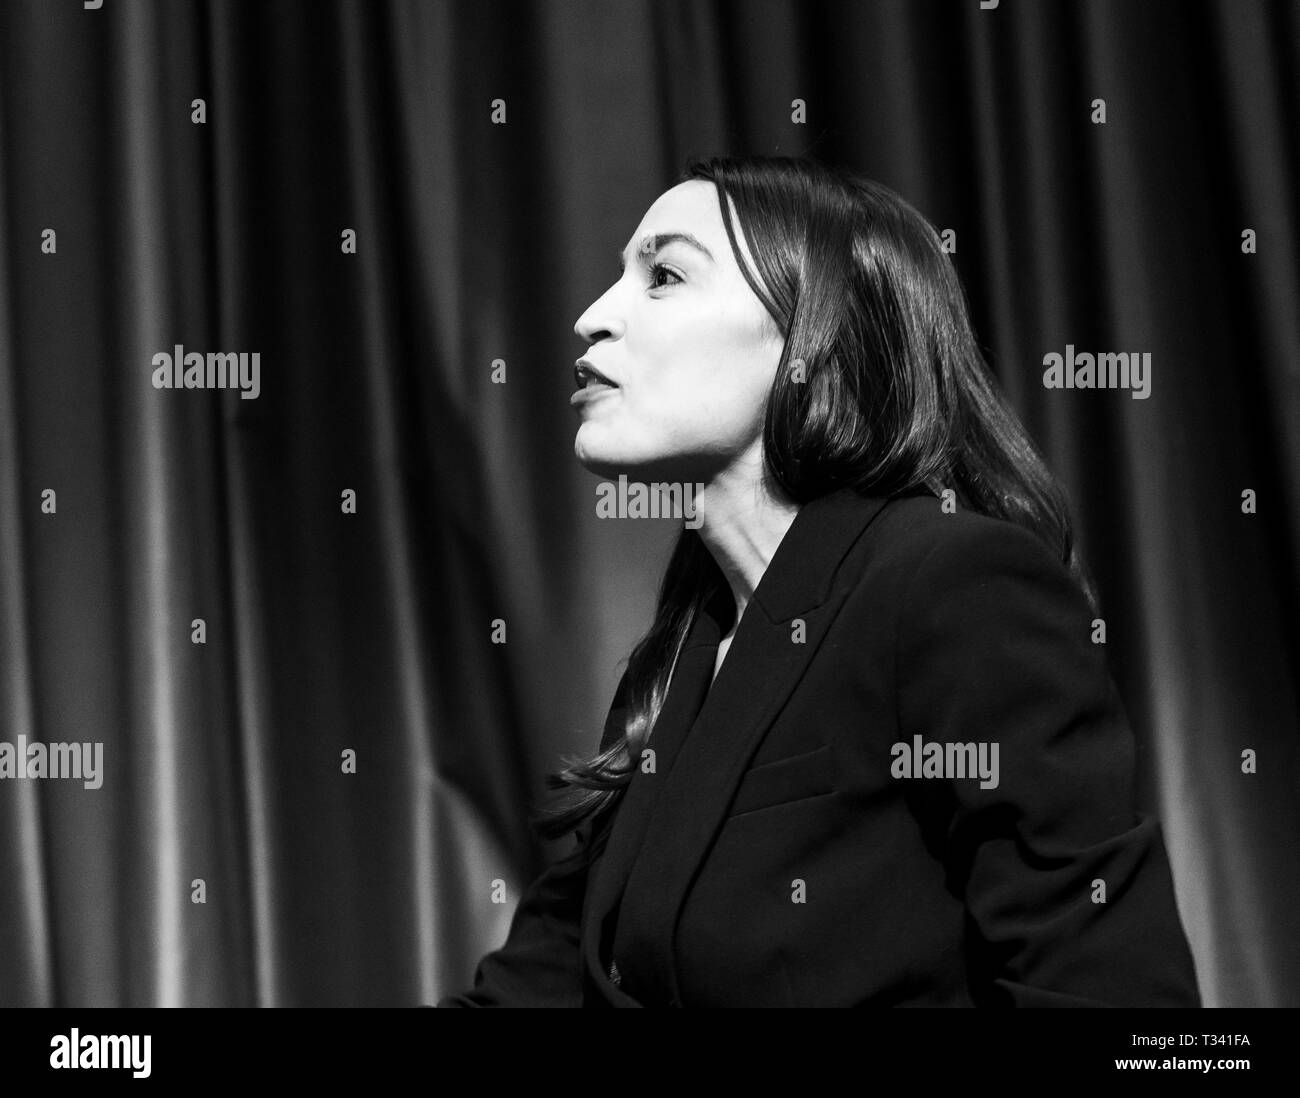 New York, NY - April 5, 2019: US Congresswoman Alexandria Ocasio-Cortez sattends National Action Network 2019 convention at Sheraton Times Square. Stock Photo